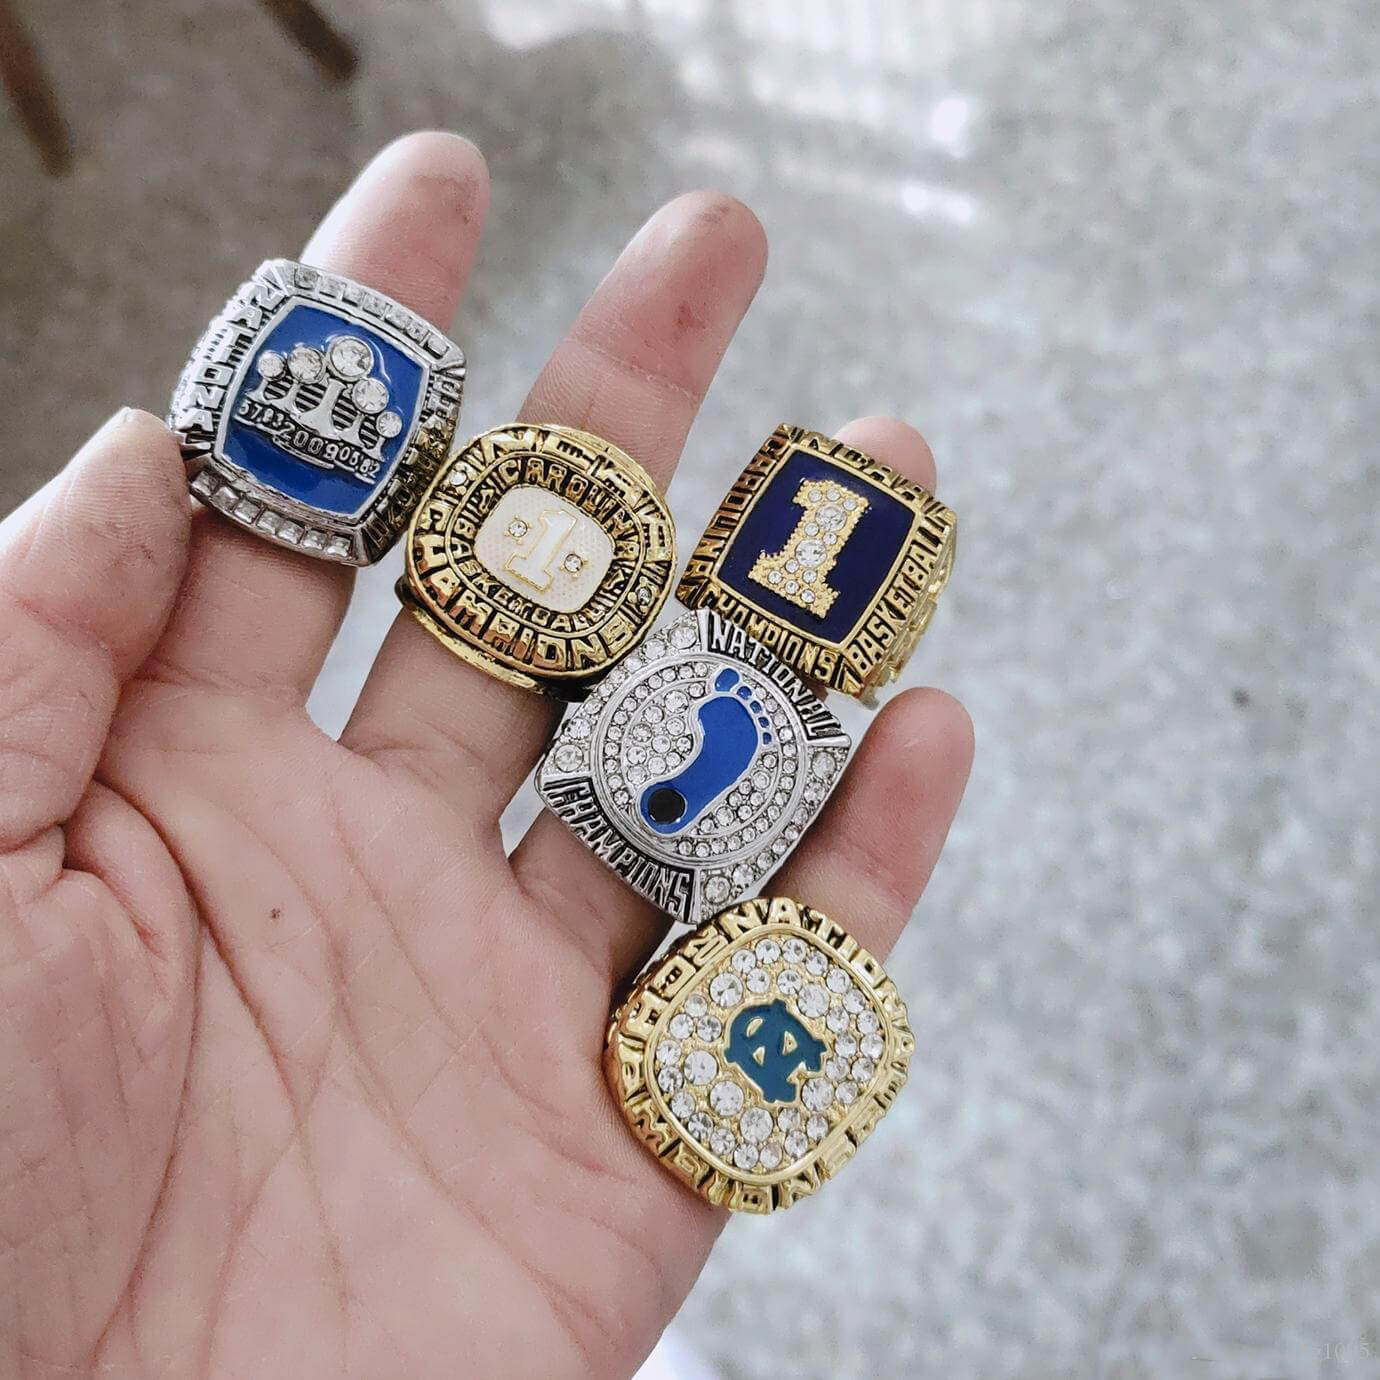 Get To Know the 2009 Championship Ring